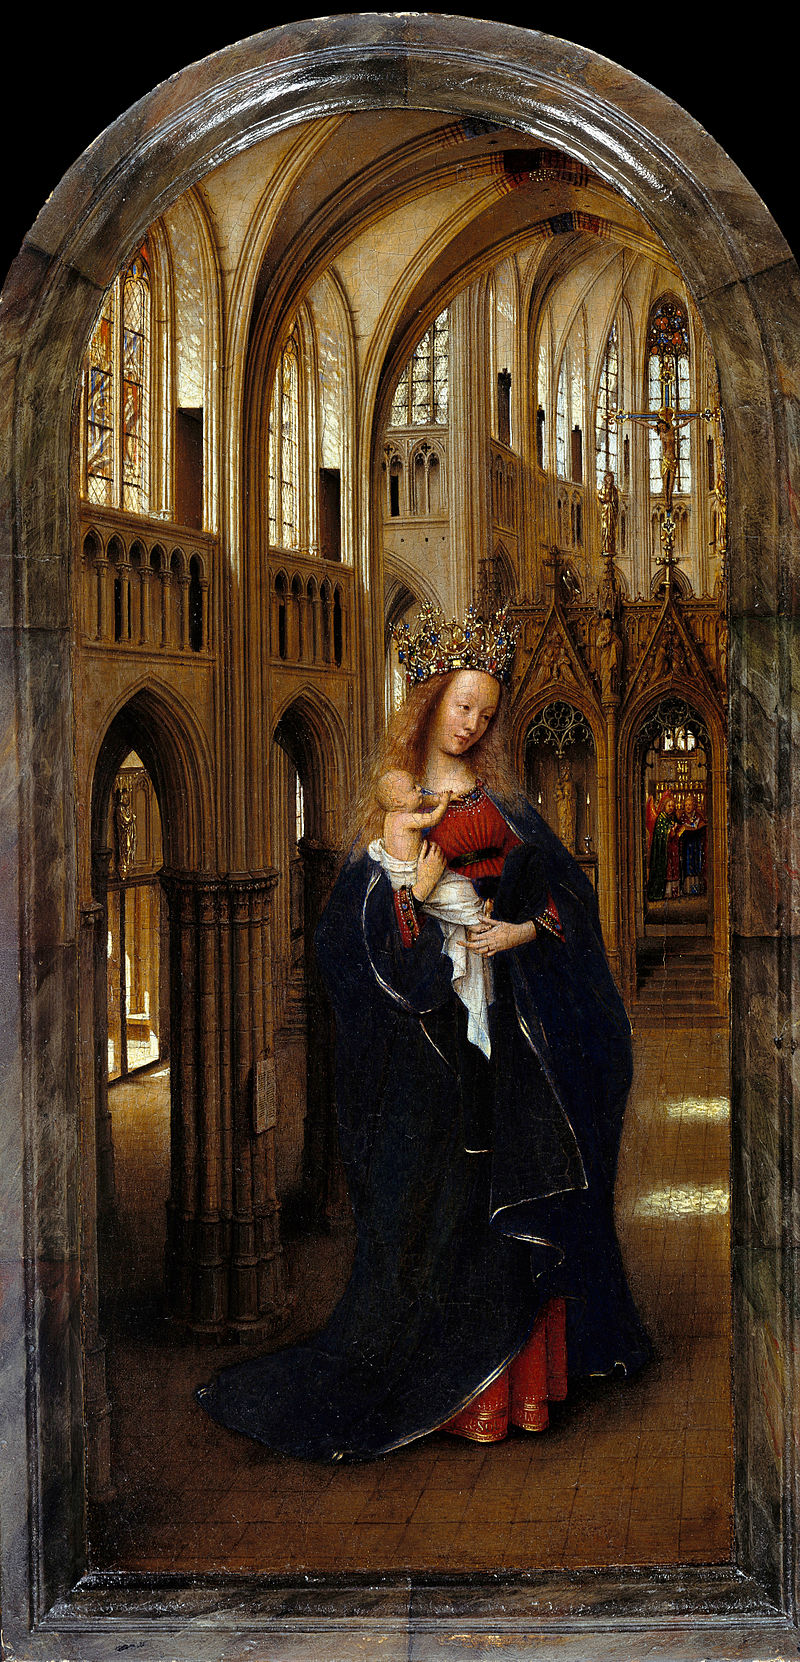 Madonna in the Church by Blue Surf Art by Jan Van Eyck Reproduction Painting by Blue Surf Art